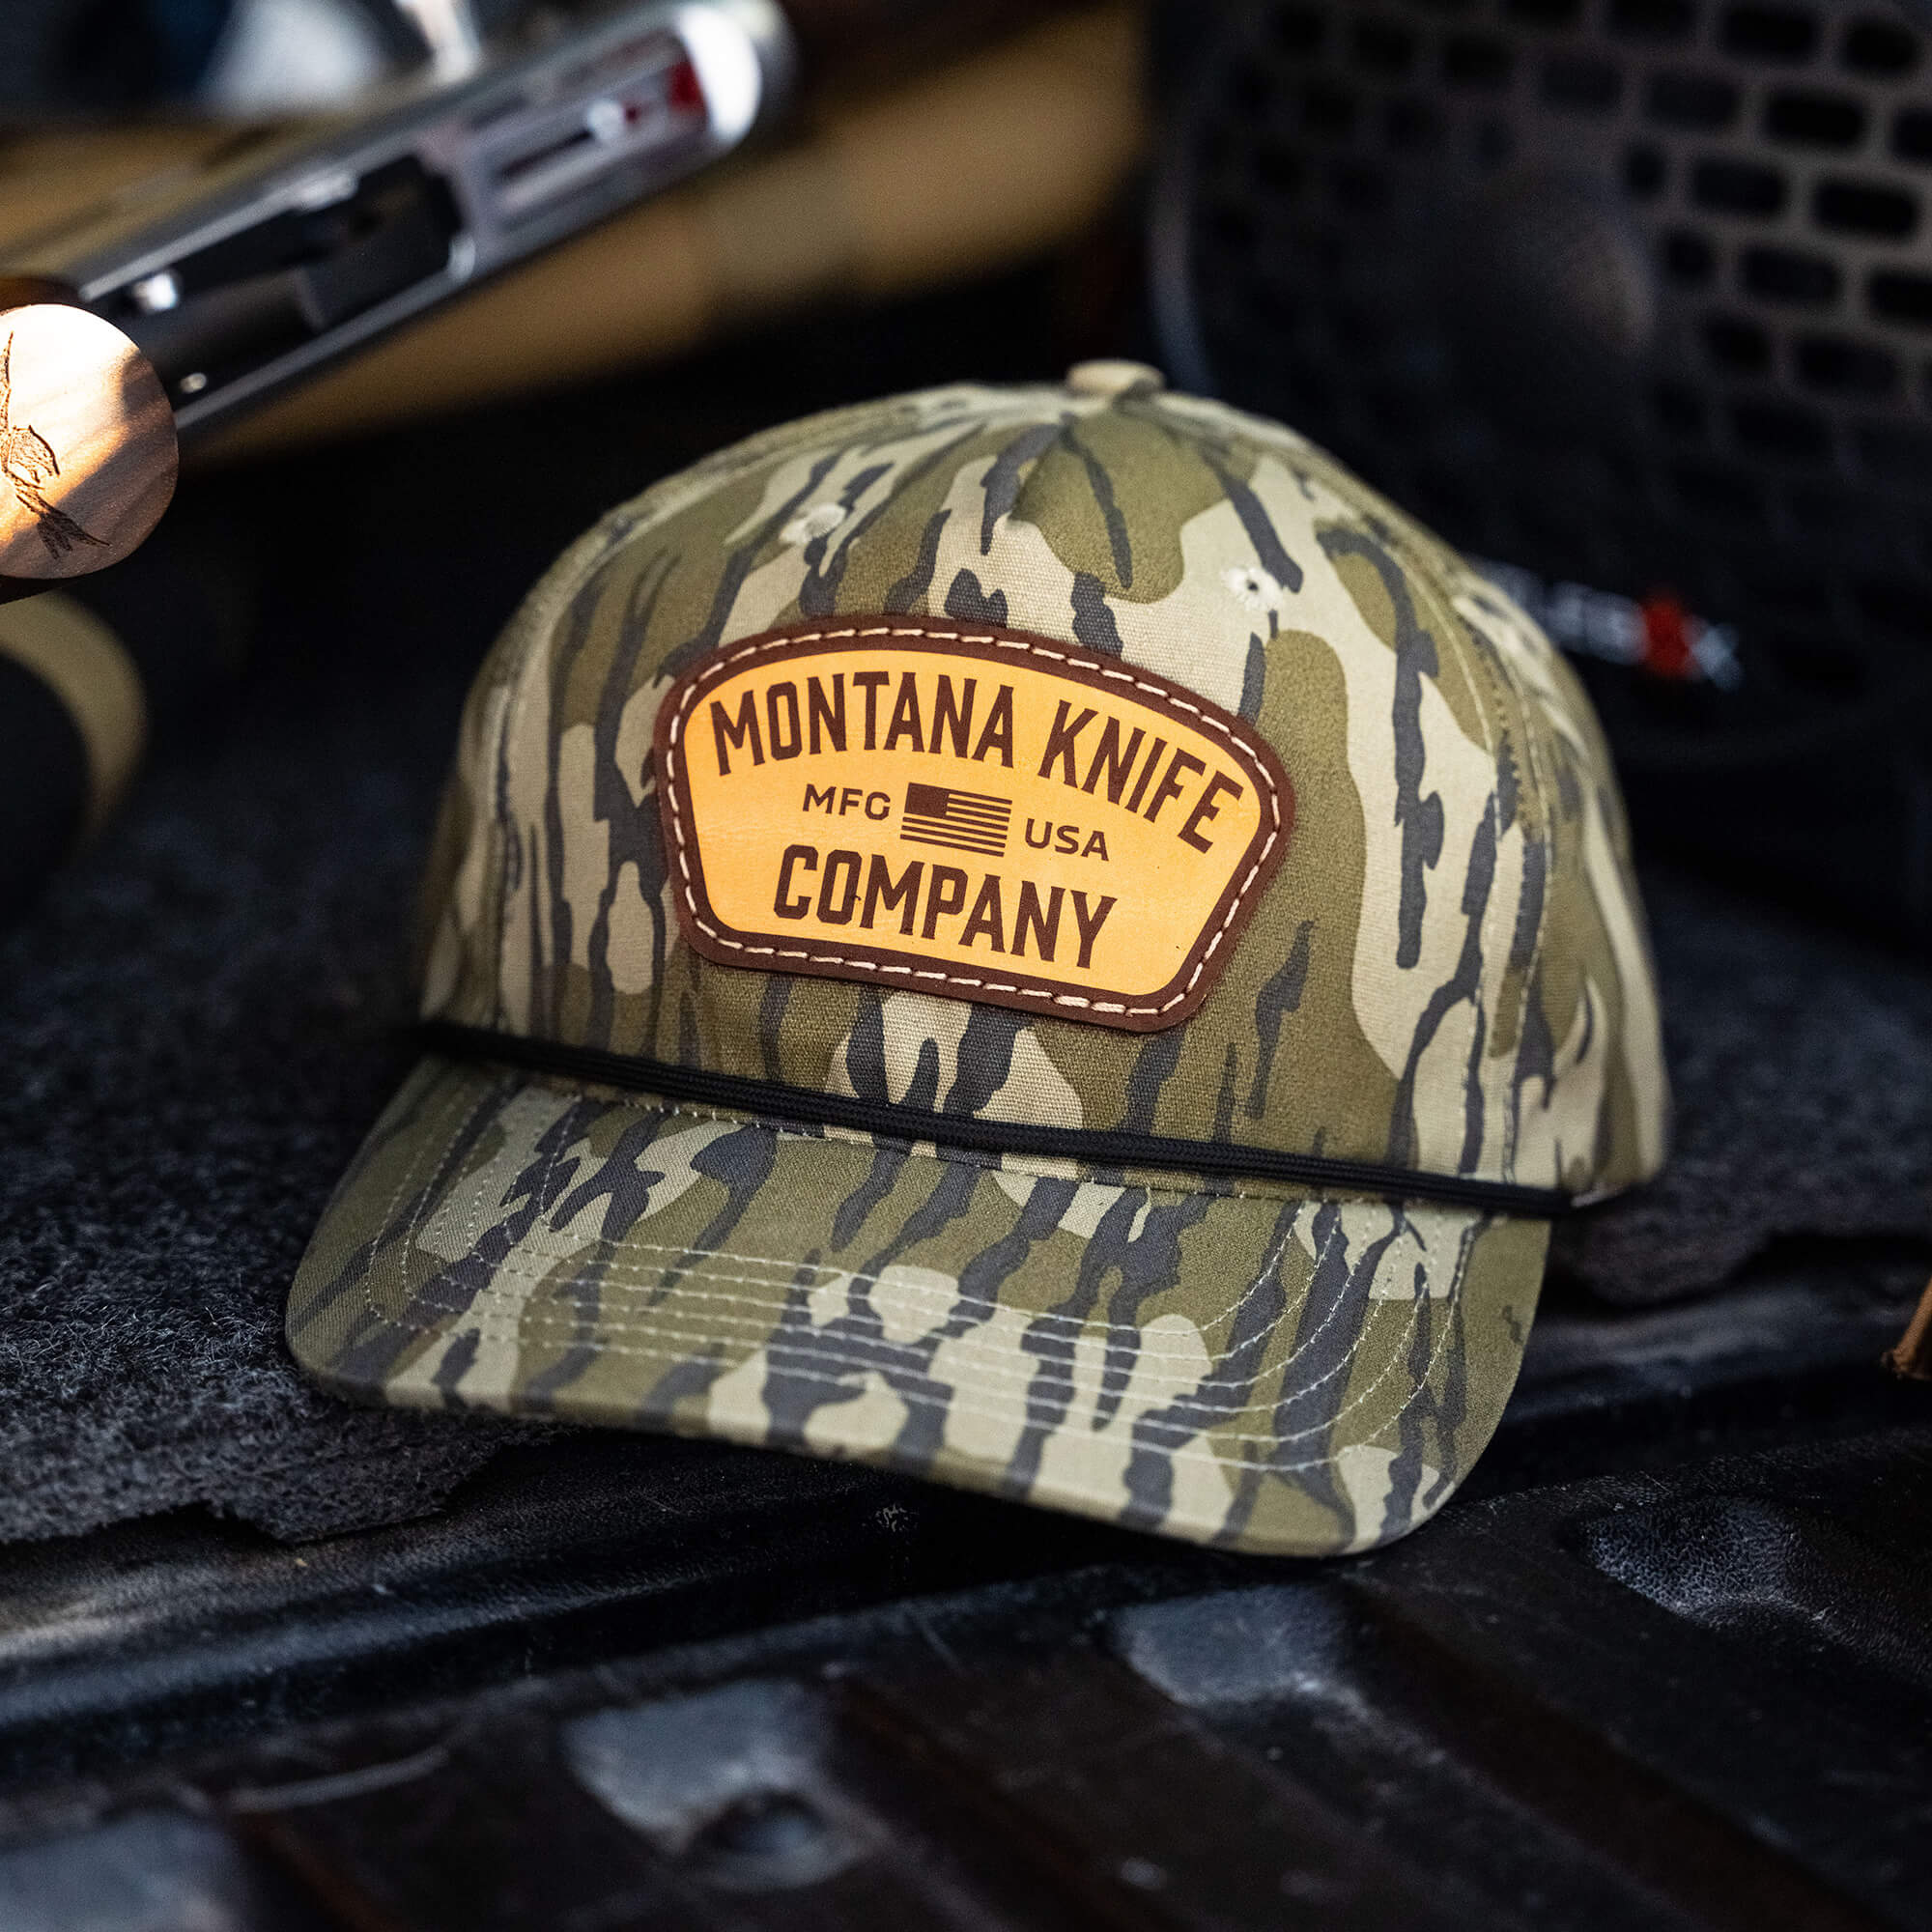 Mossy Oak Fishing Hat – Luckless Outfitters